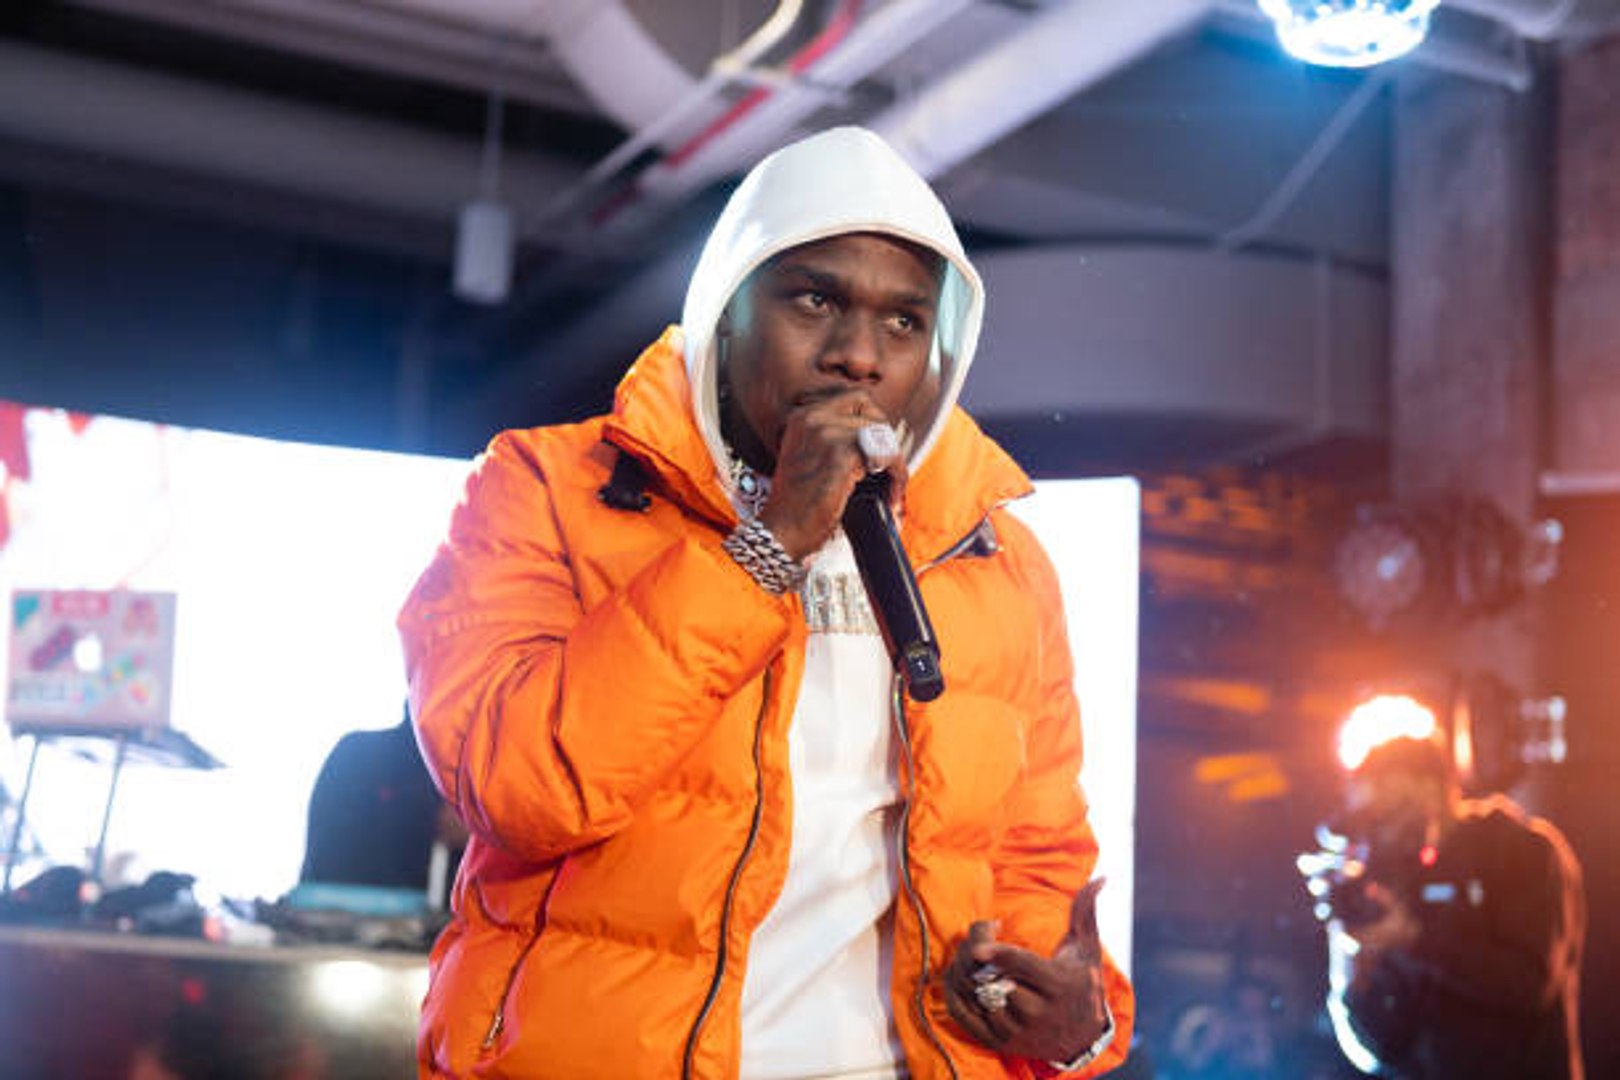 DaBaby Issues Apology for Assaulting Female Fan